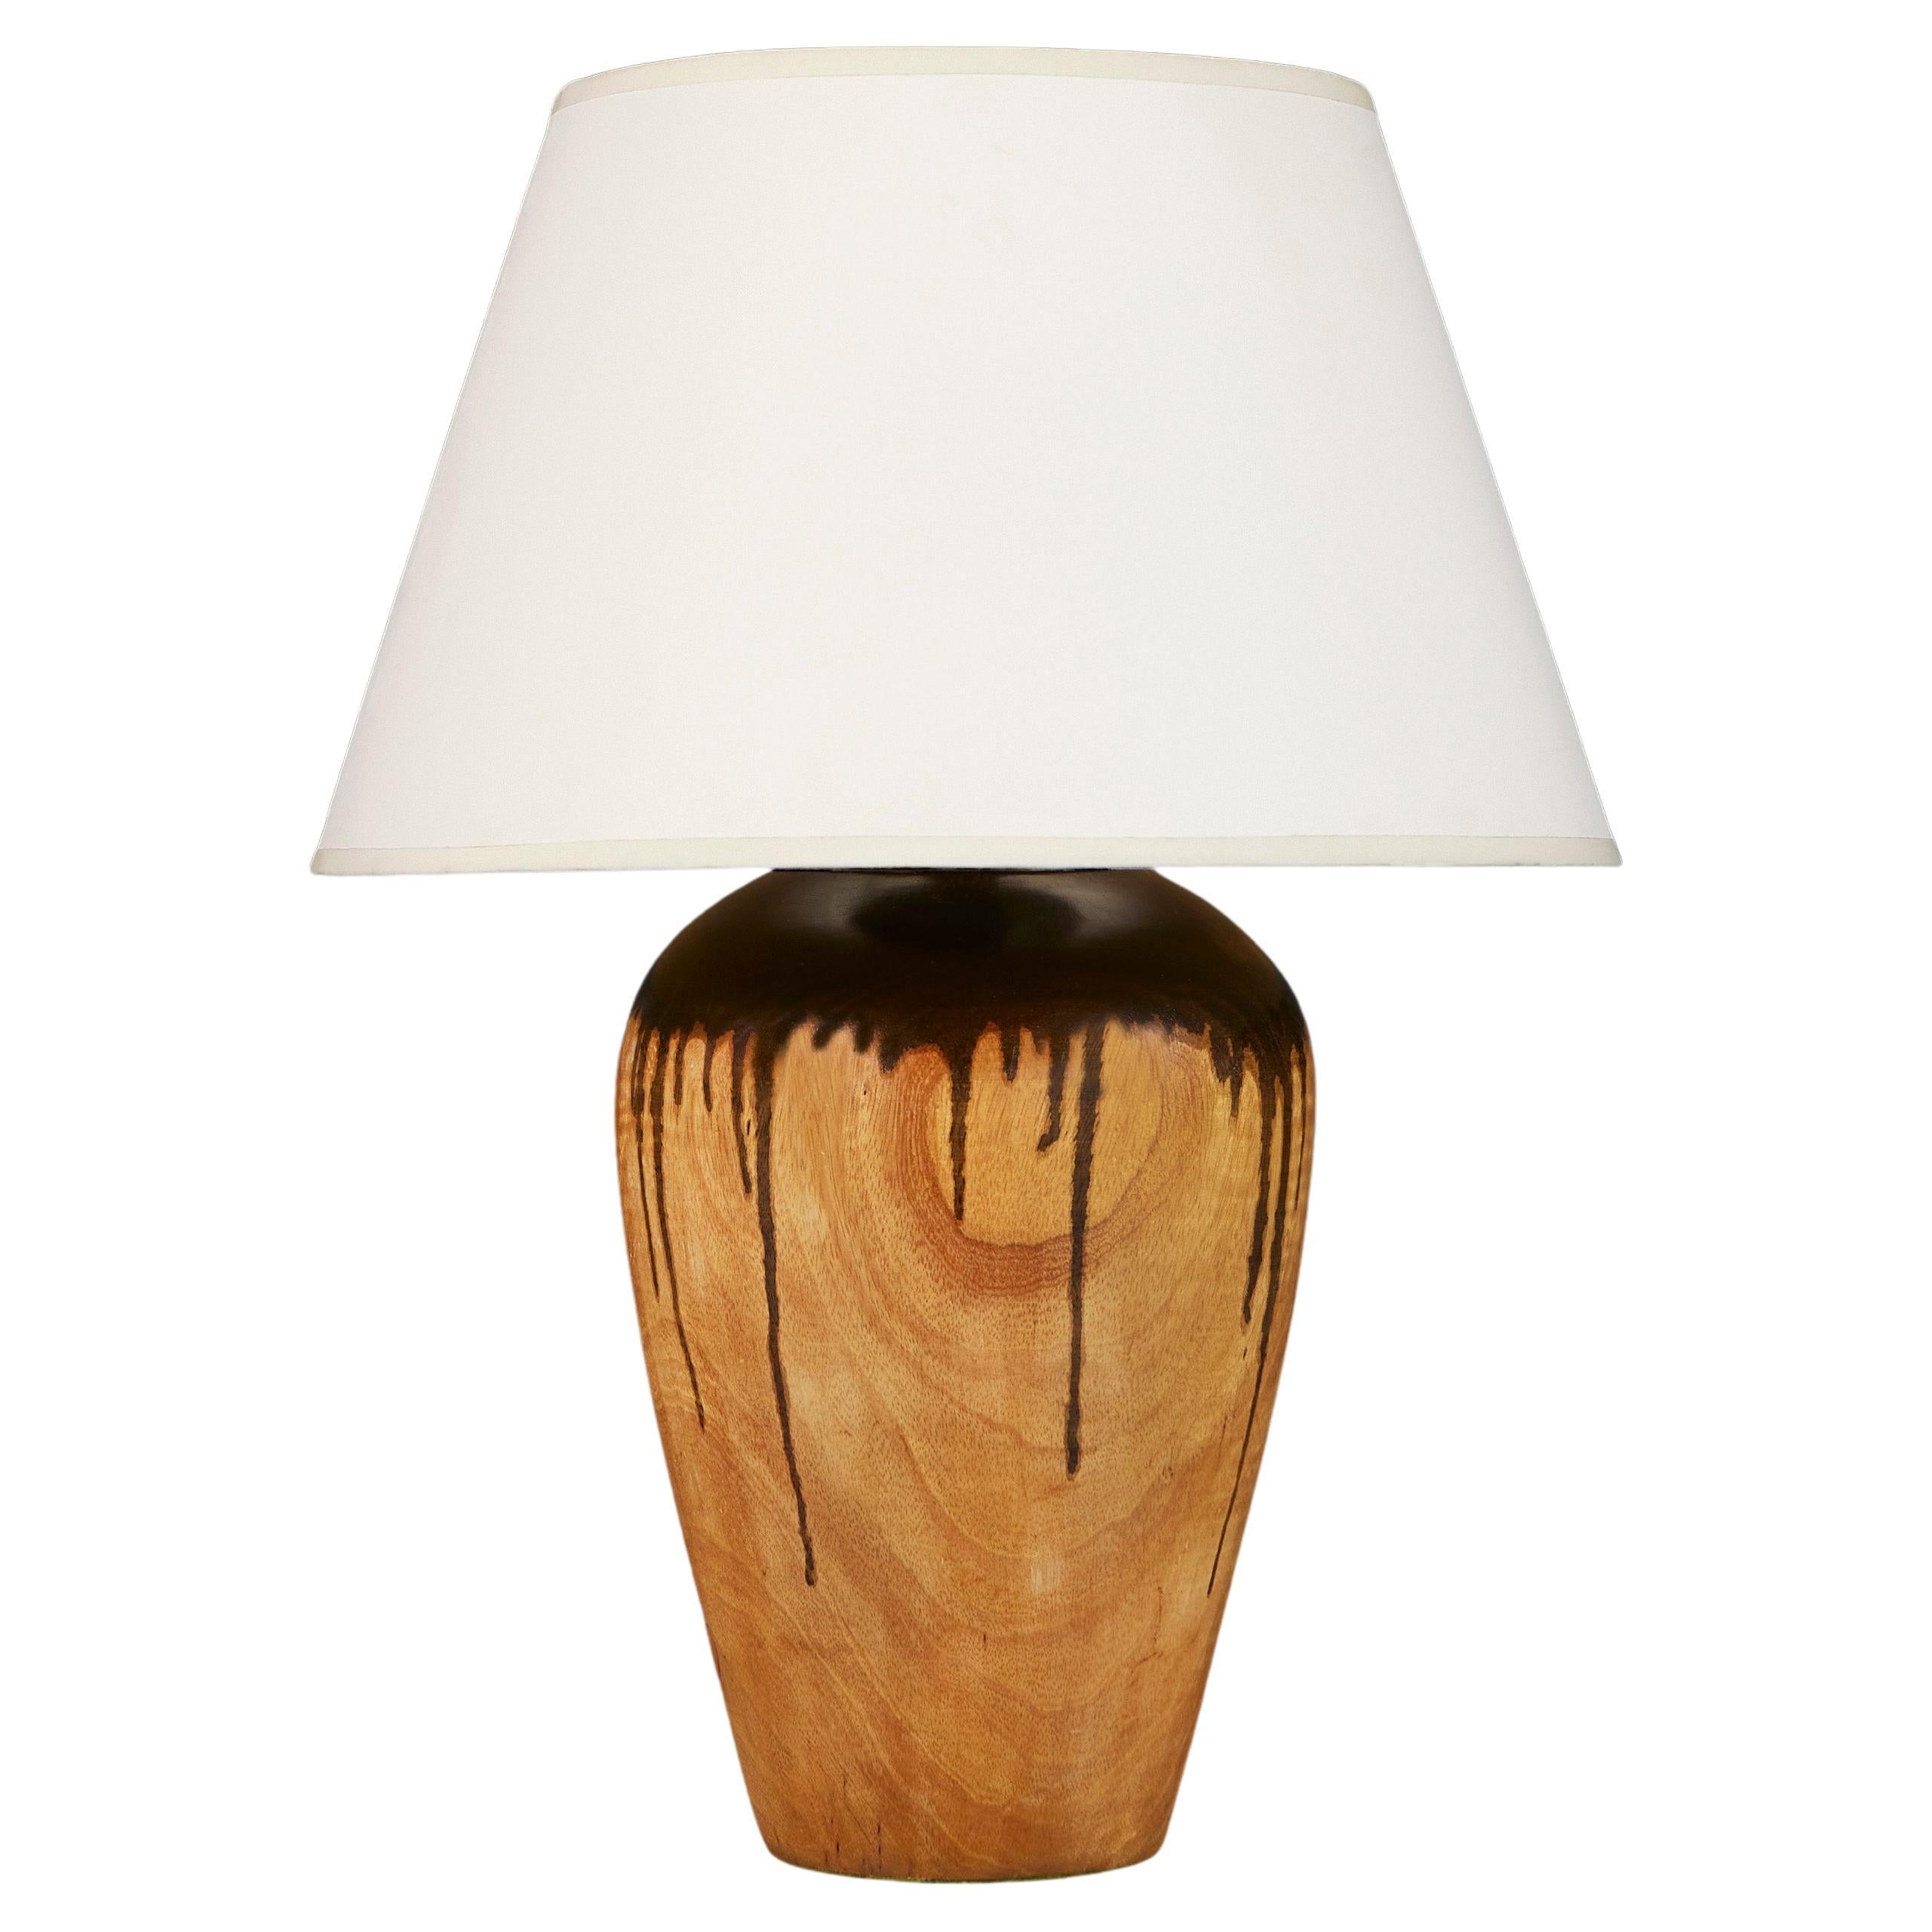 A wooden drip vase as a lamp For Sale